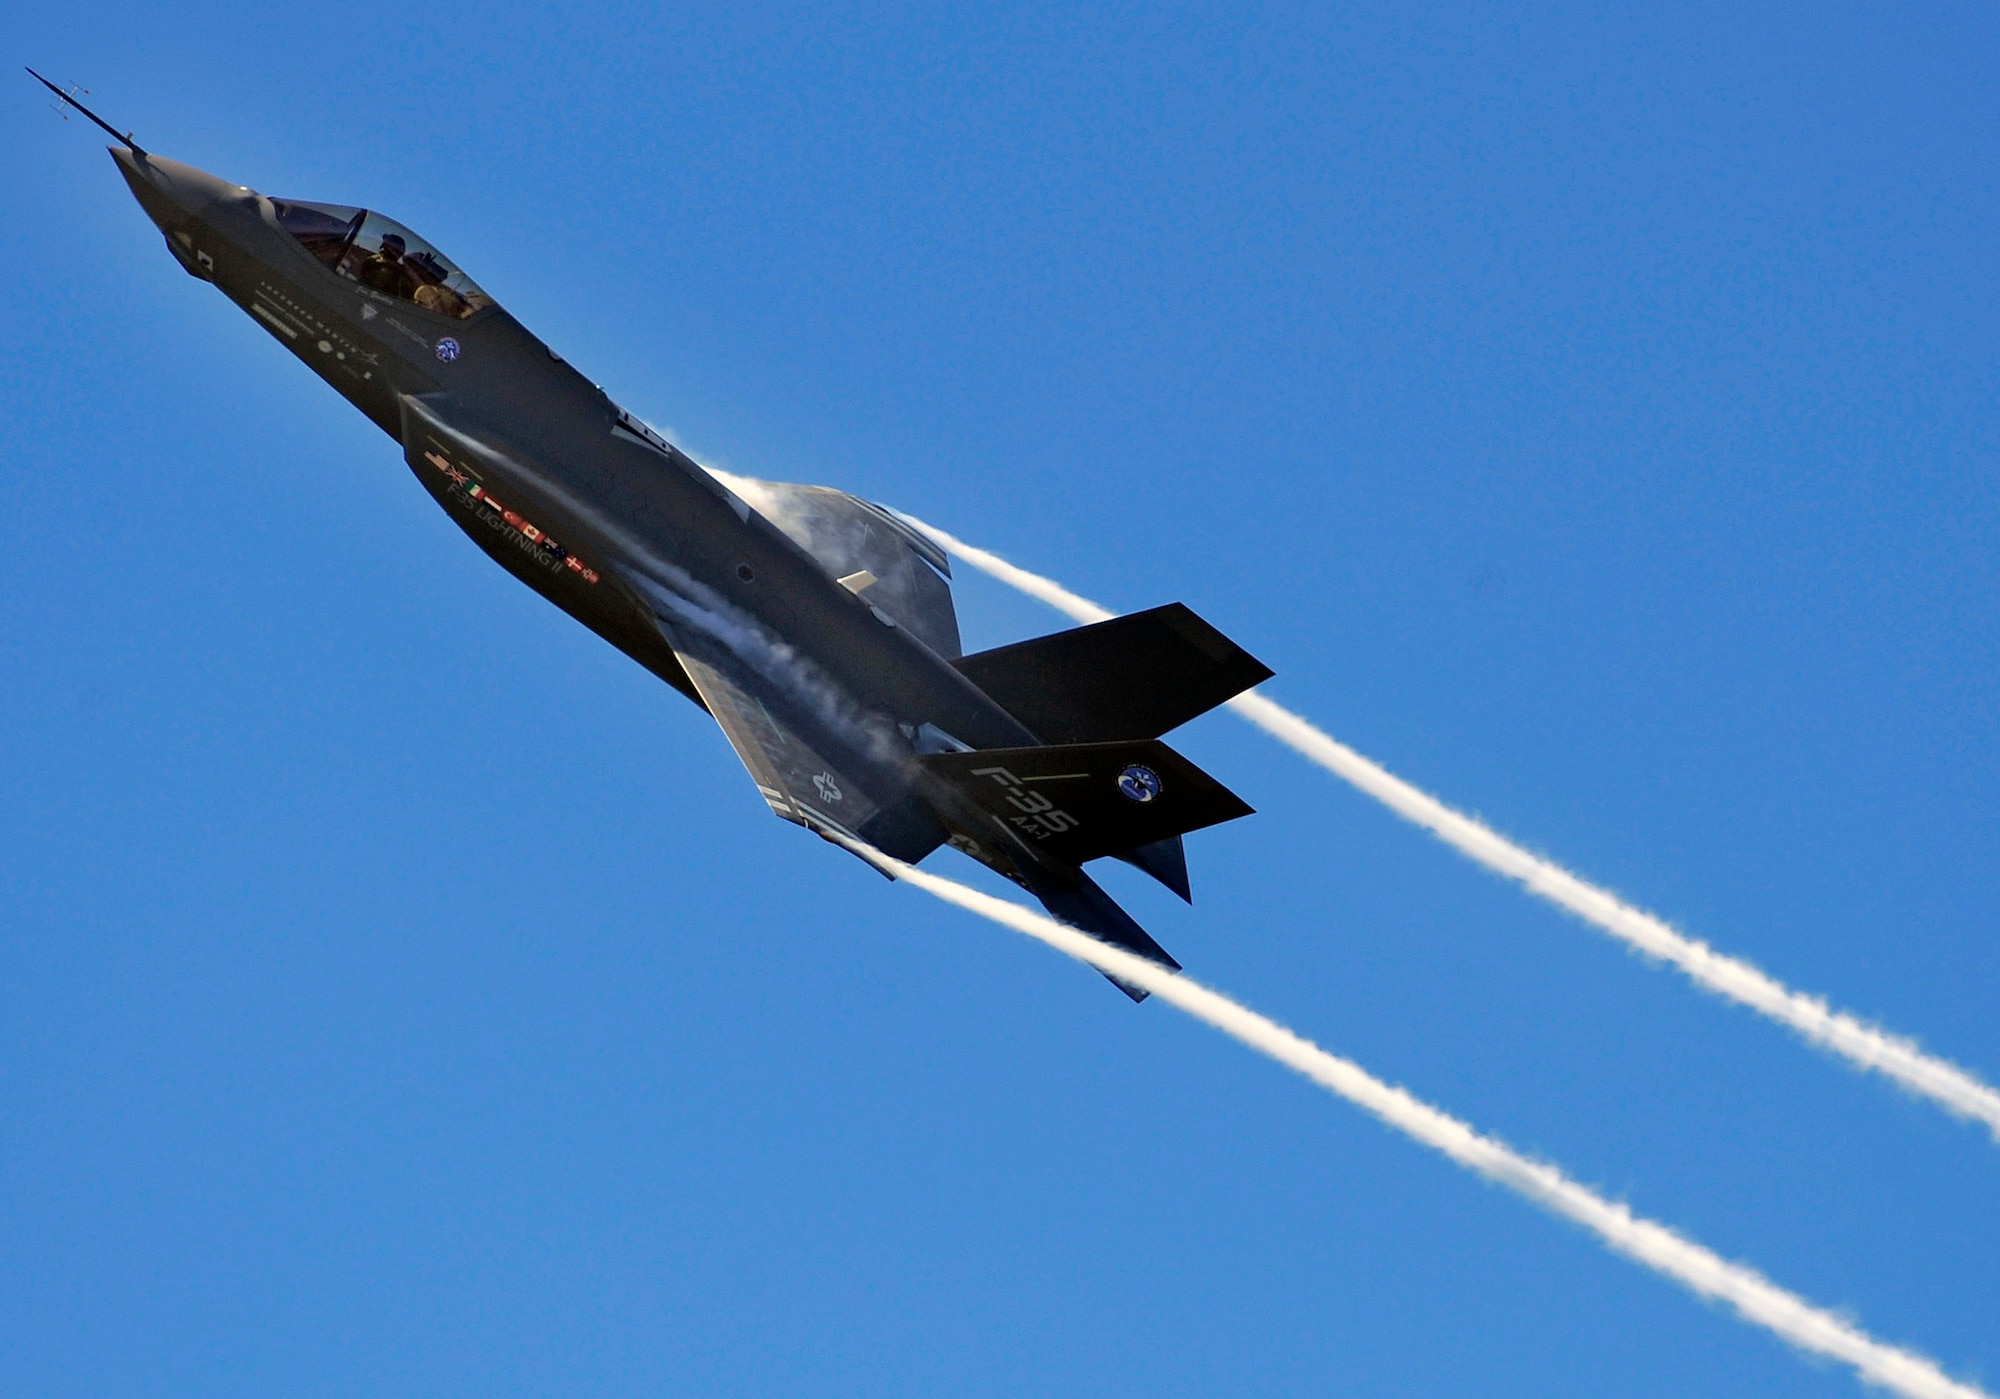 An F-35 Lightning II Joint Strike Fighter test aircraft banks over the flightline at Eglin Air Force Base, Fla., April 23, sending contrails streaming off the wings.  The aircraft is the first F-35 to visit the base which will be the future home of the JSF training facility.  (U.S. Air Force photo/Senior Airman Julianne Showalter)